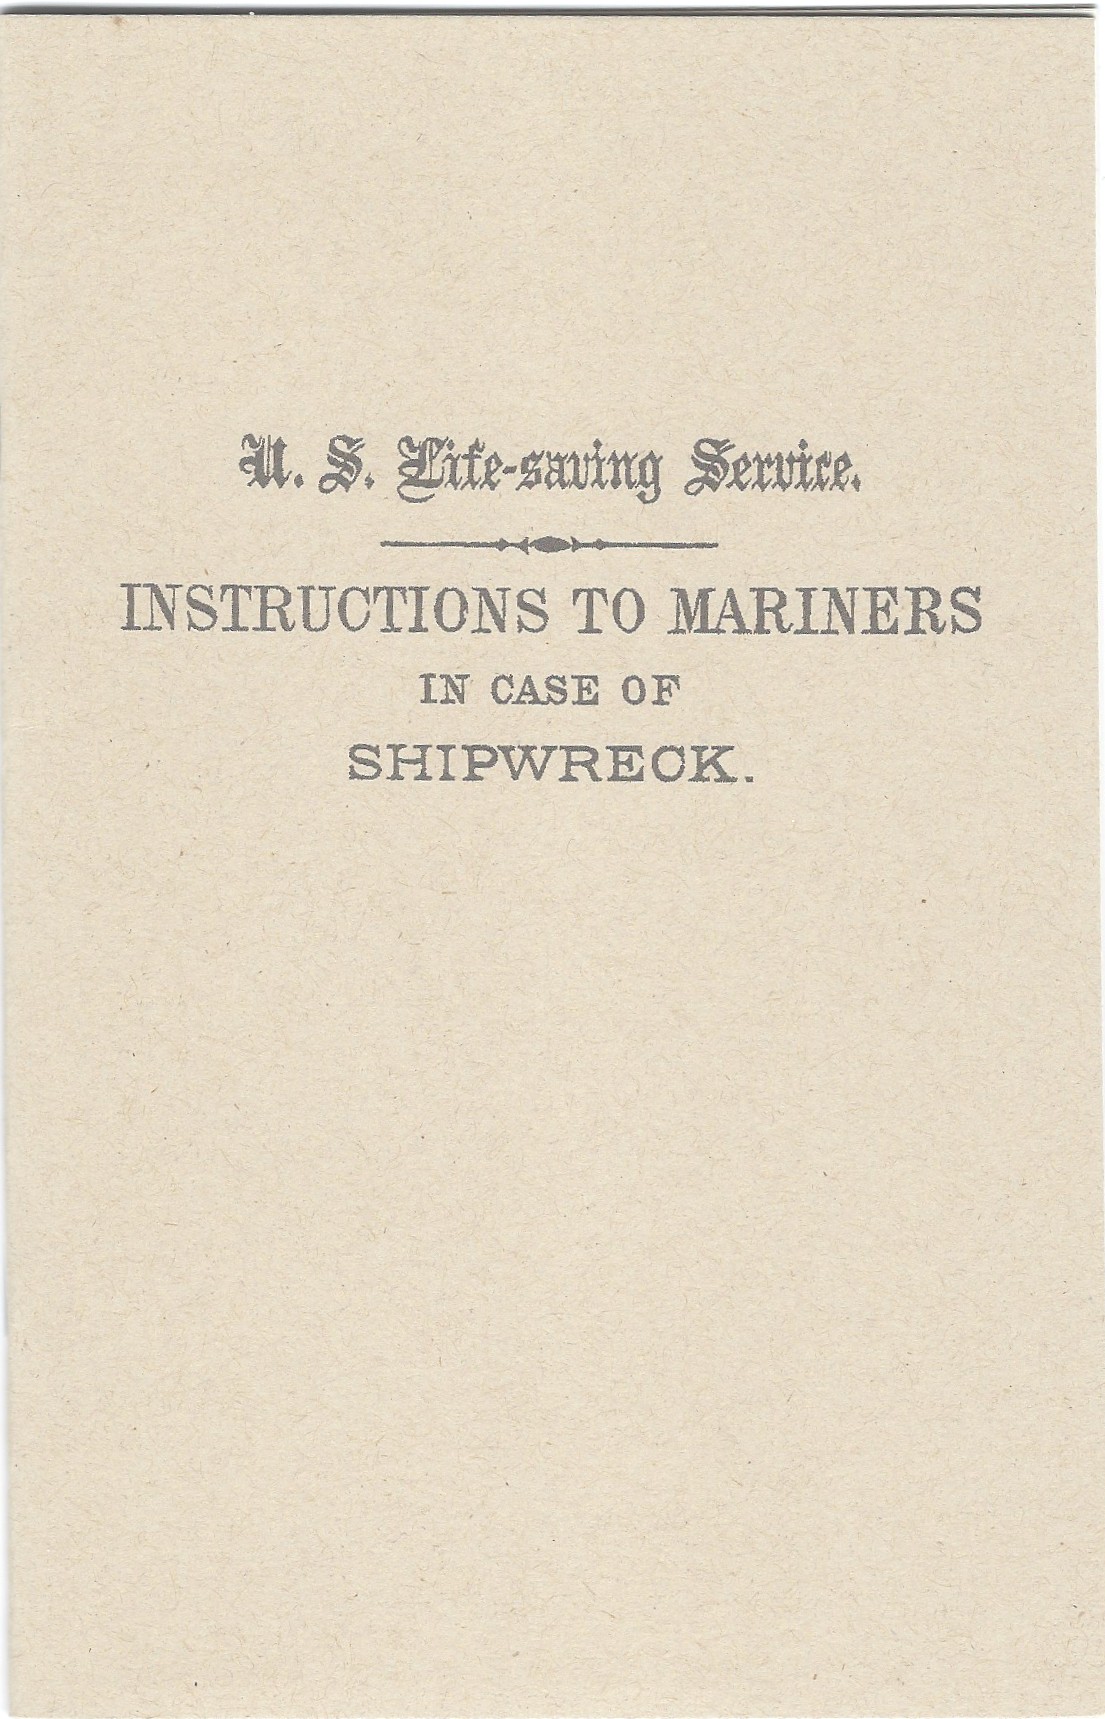 Instructions to Mariners in Case of Shipwreck, USLSS